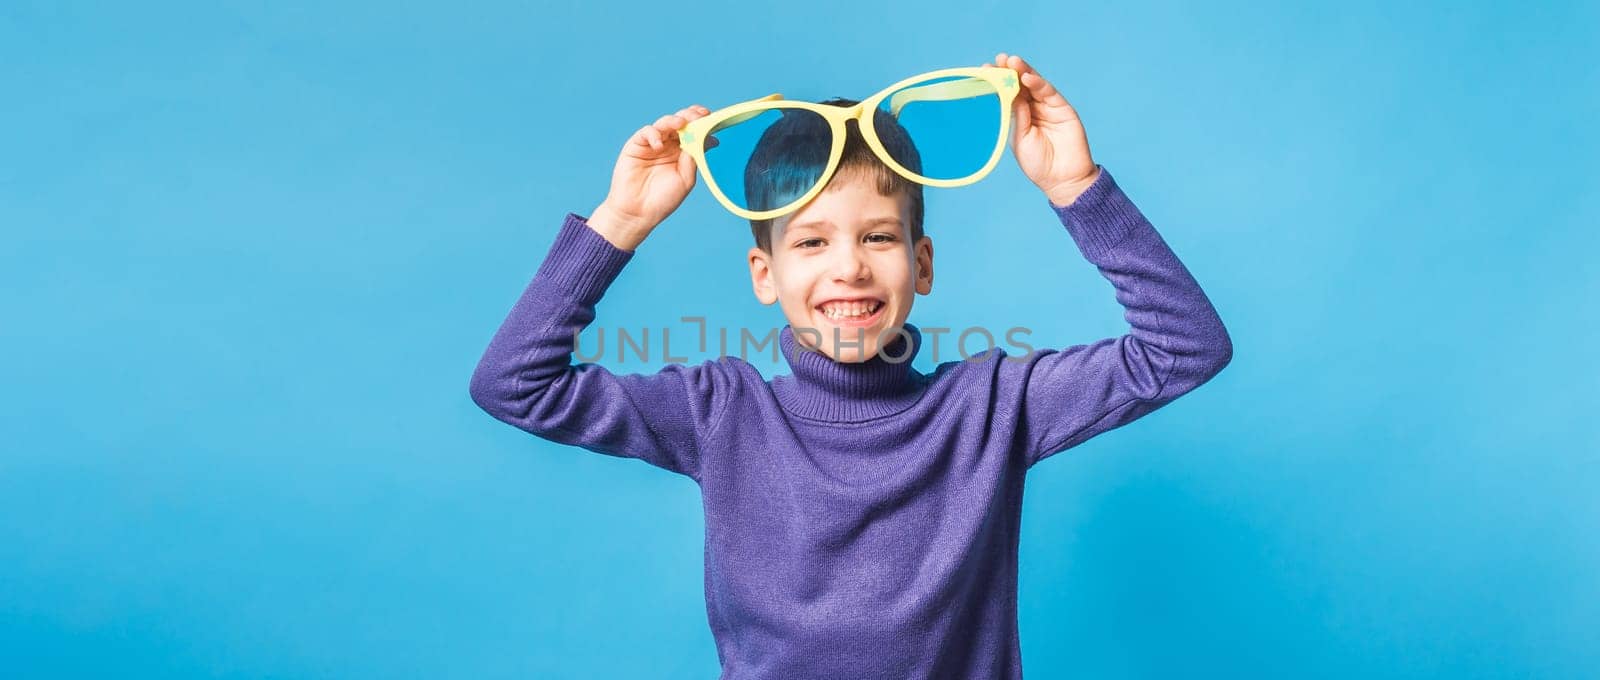 Banner Cheerful little boy generation alpha in big glasses express a surprised face isolated on blue background with copy space by Satura86